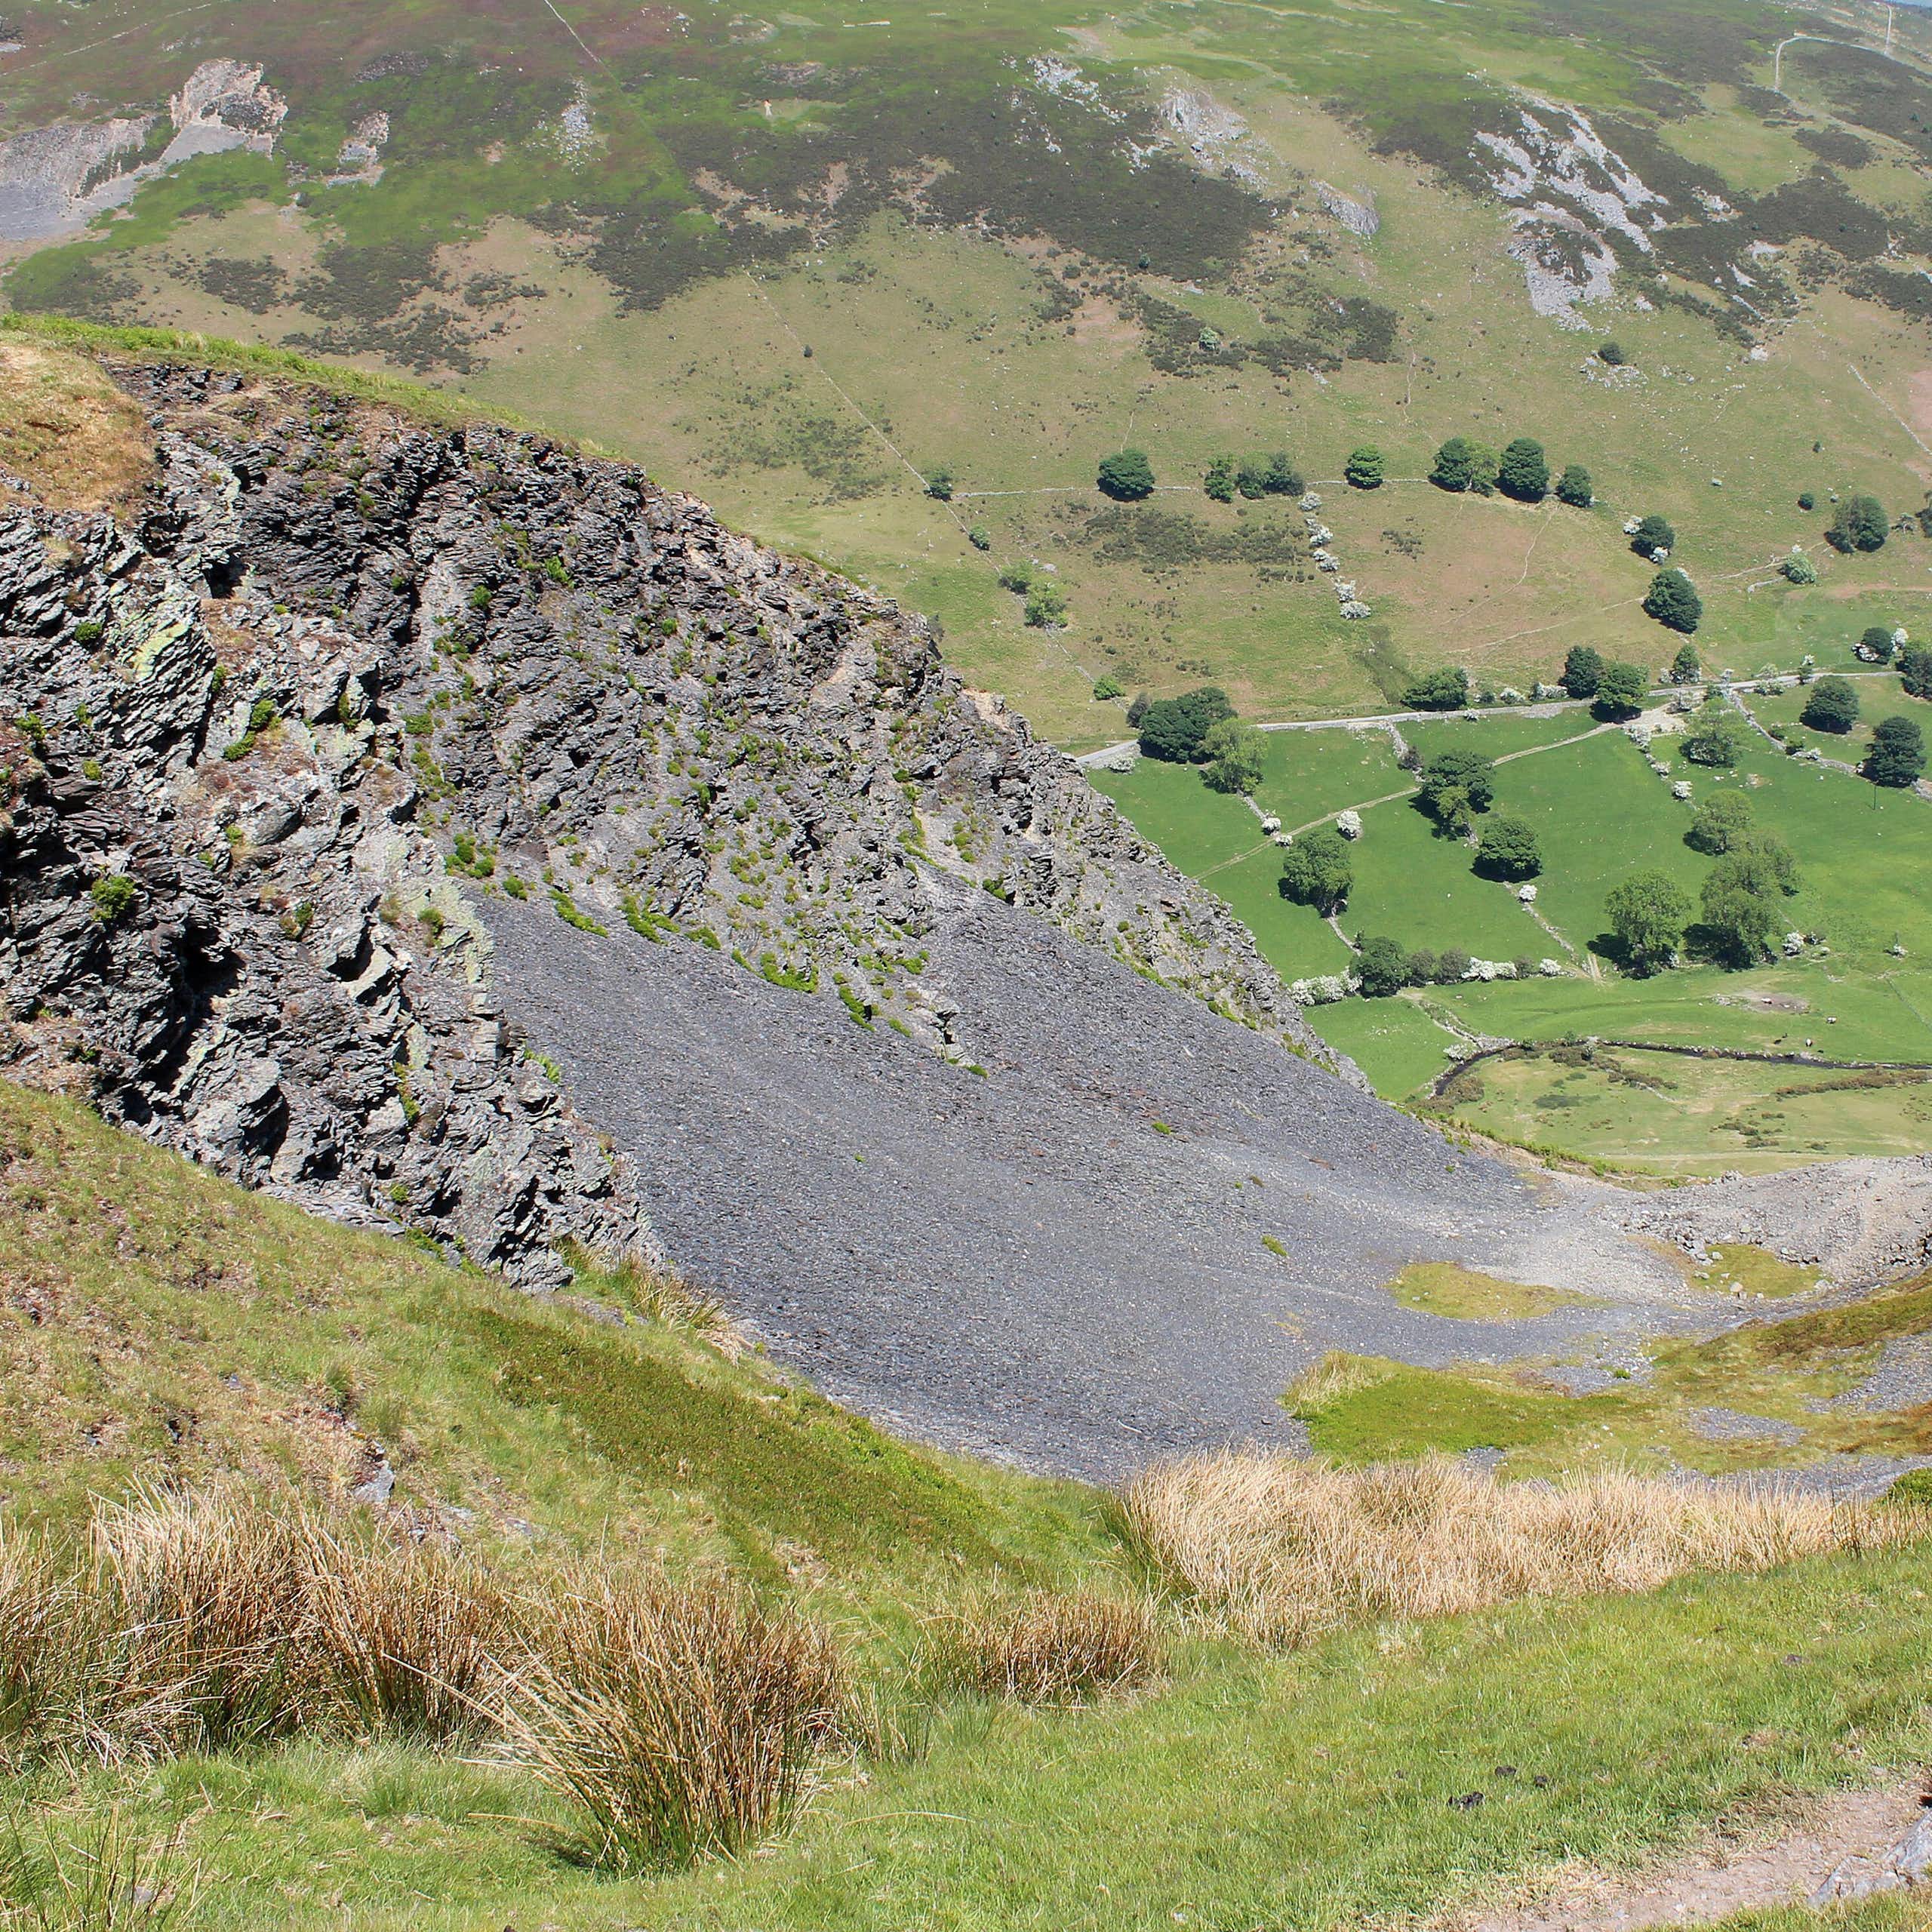 Wide green hilly landscape with black scree on hill in foreground